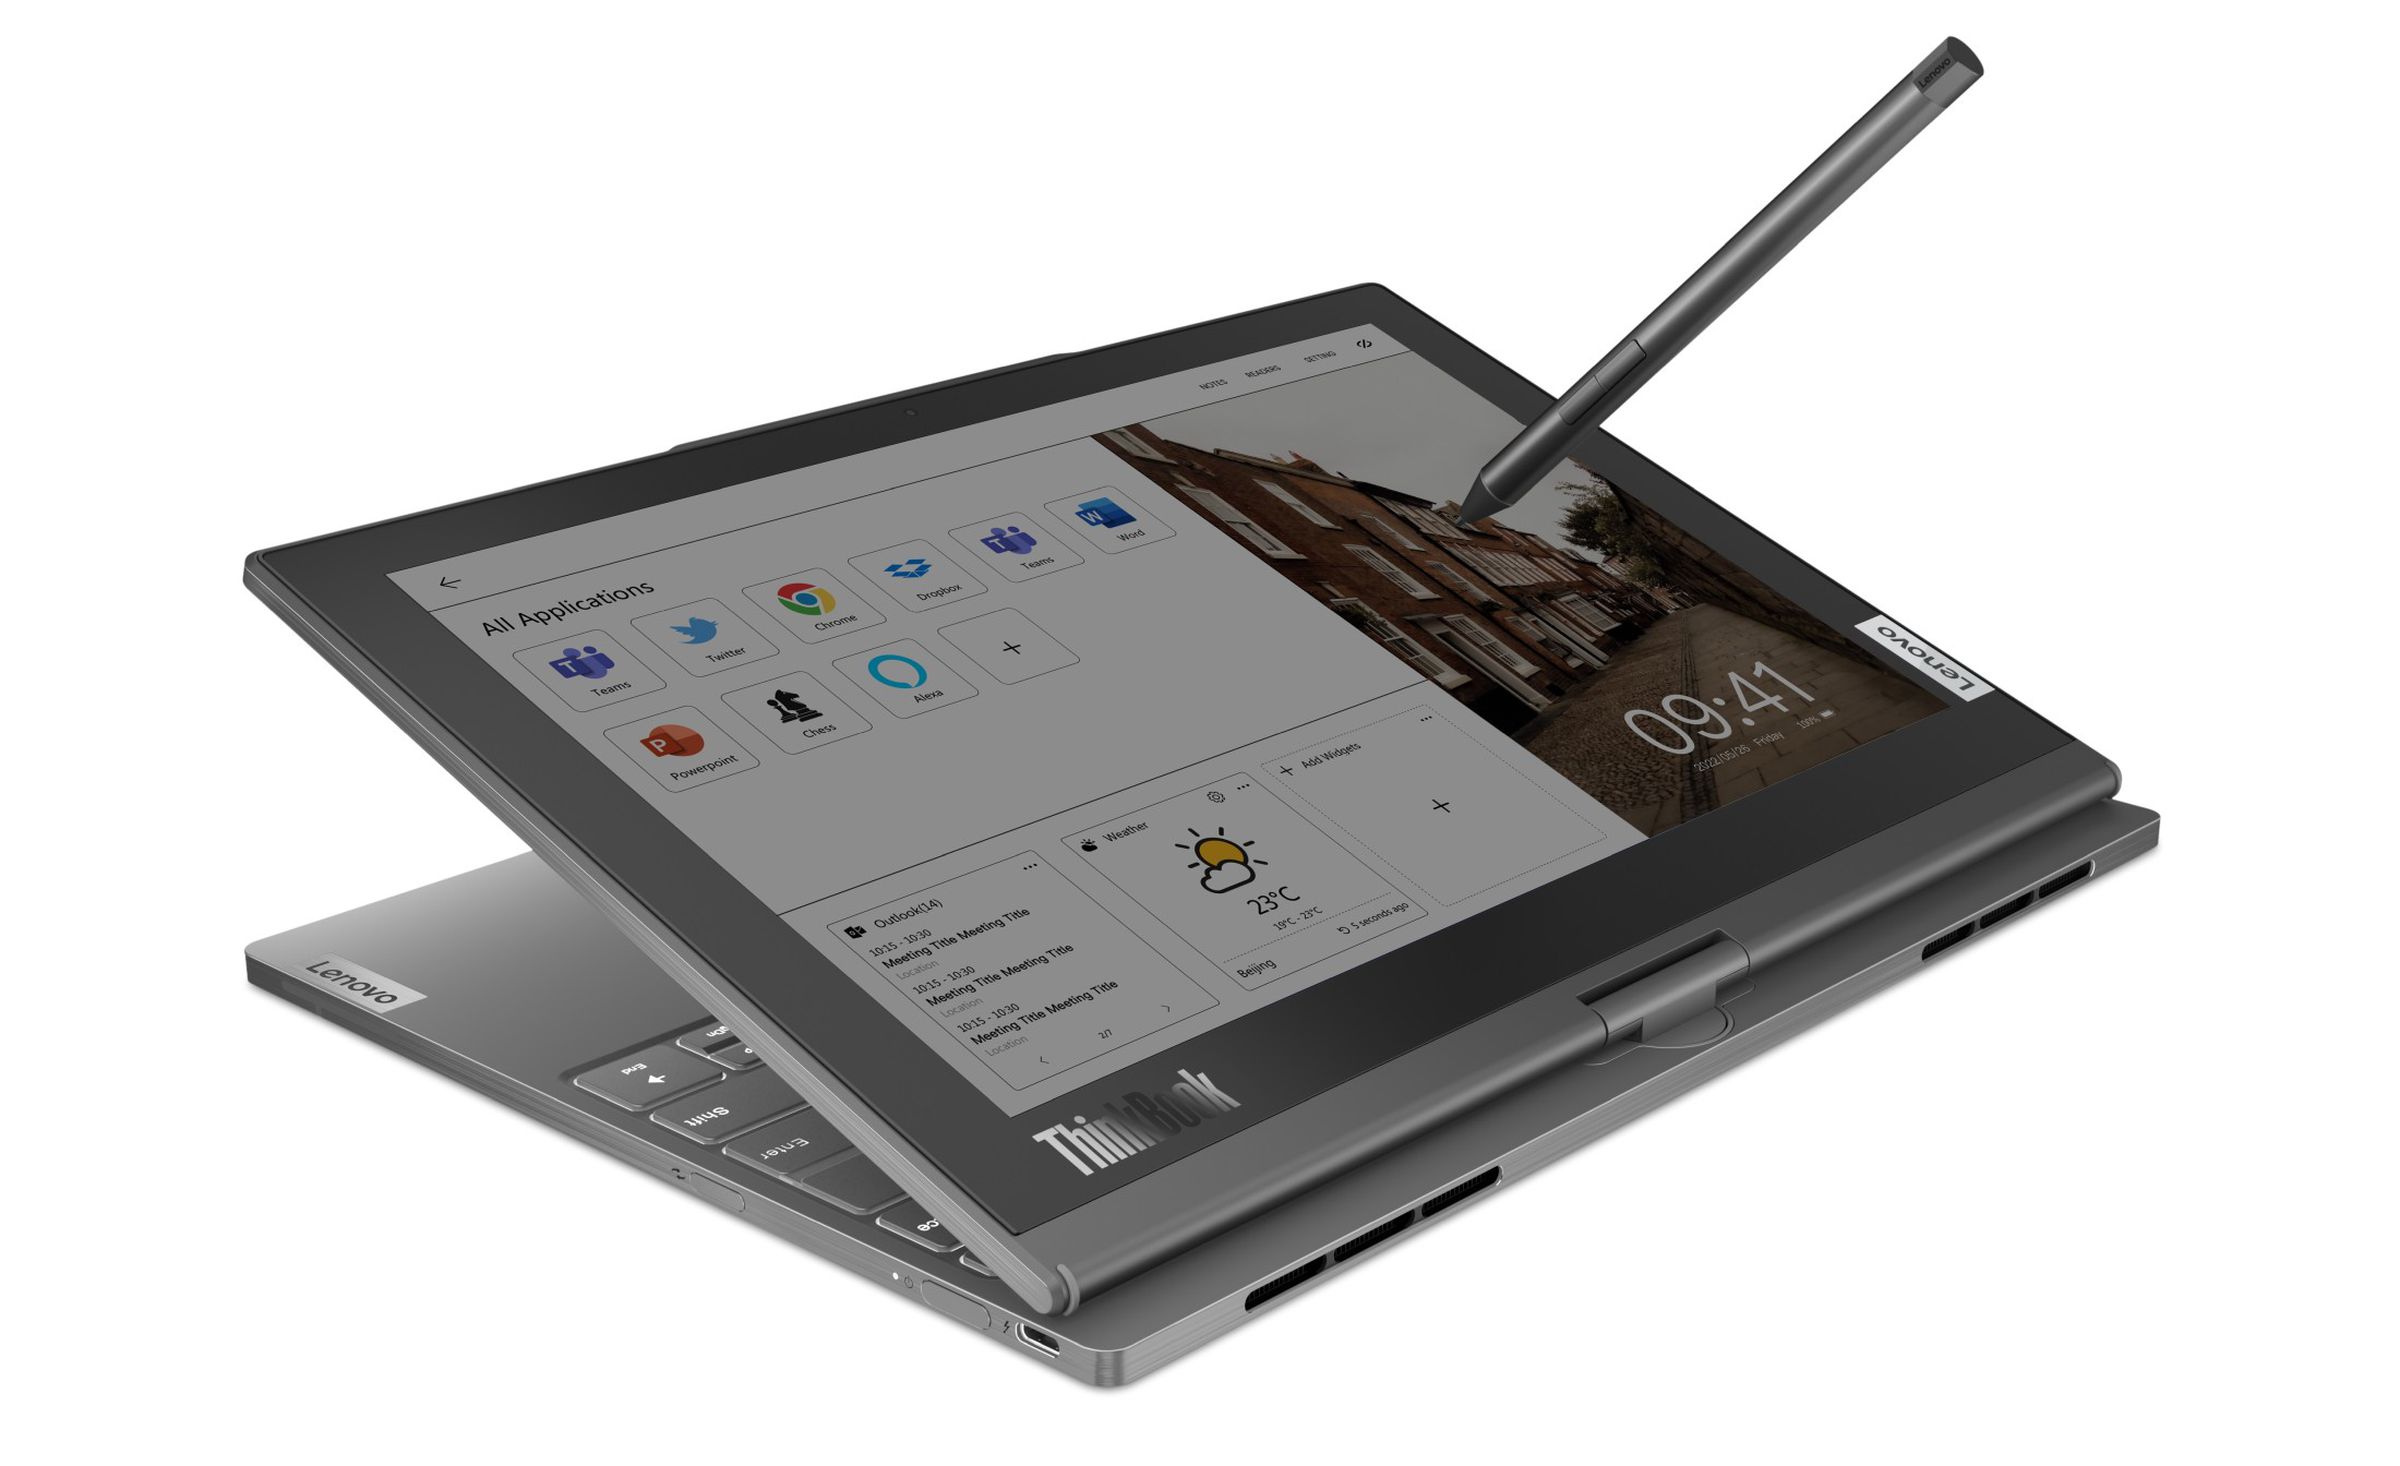 The E-ink side supports a pen, too.